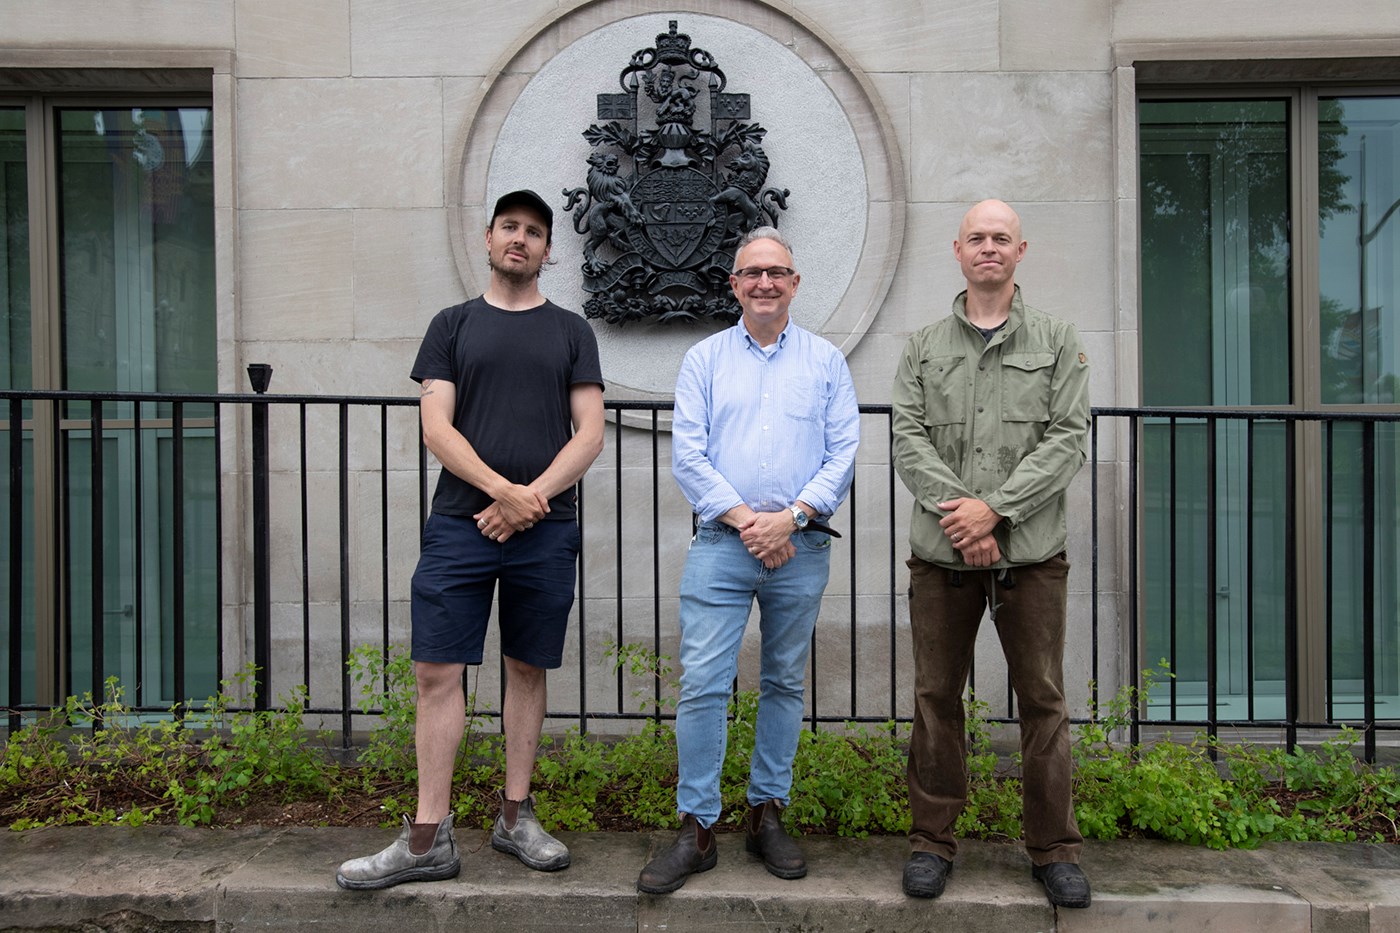 The parliamentary sculpting team in 2019 — from left, Nicholas Thompson, Phil White and John-Philippe Smith — stand in front of a sculpture of the Arms of Canada they created. The sculpture was cast in bronze and mounted on the north face of Ottawa’s Wellington Building. (Photo credit: Public Services and Procurement Canada)